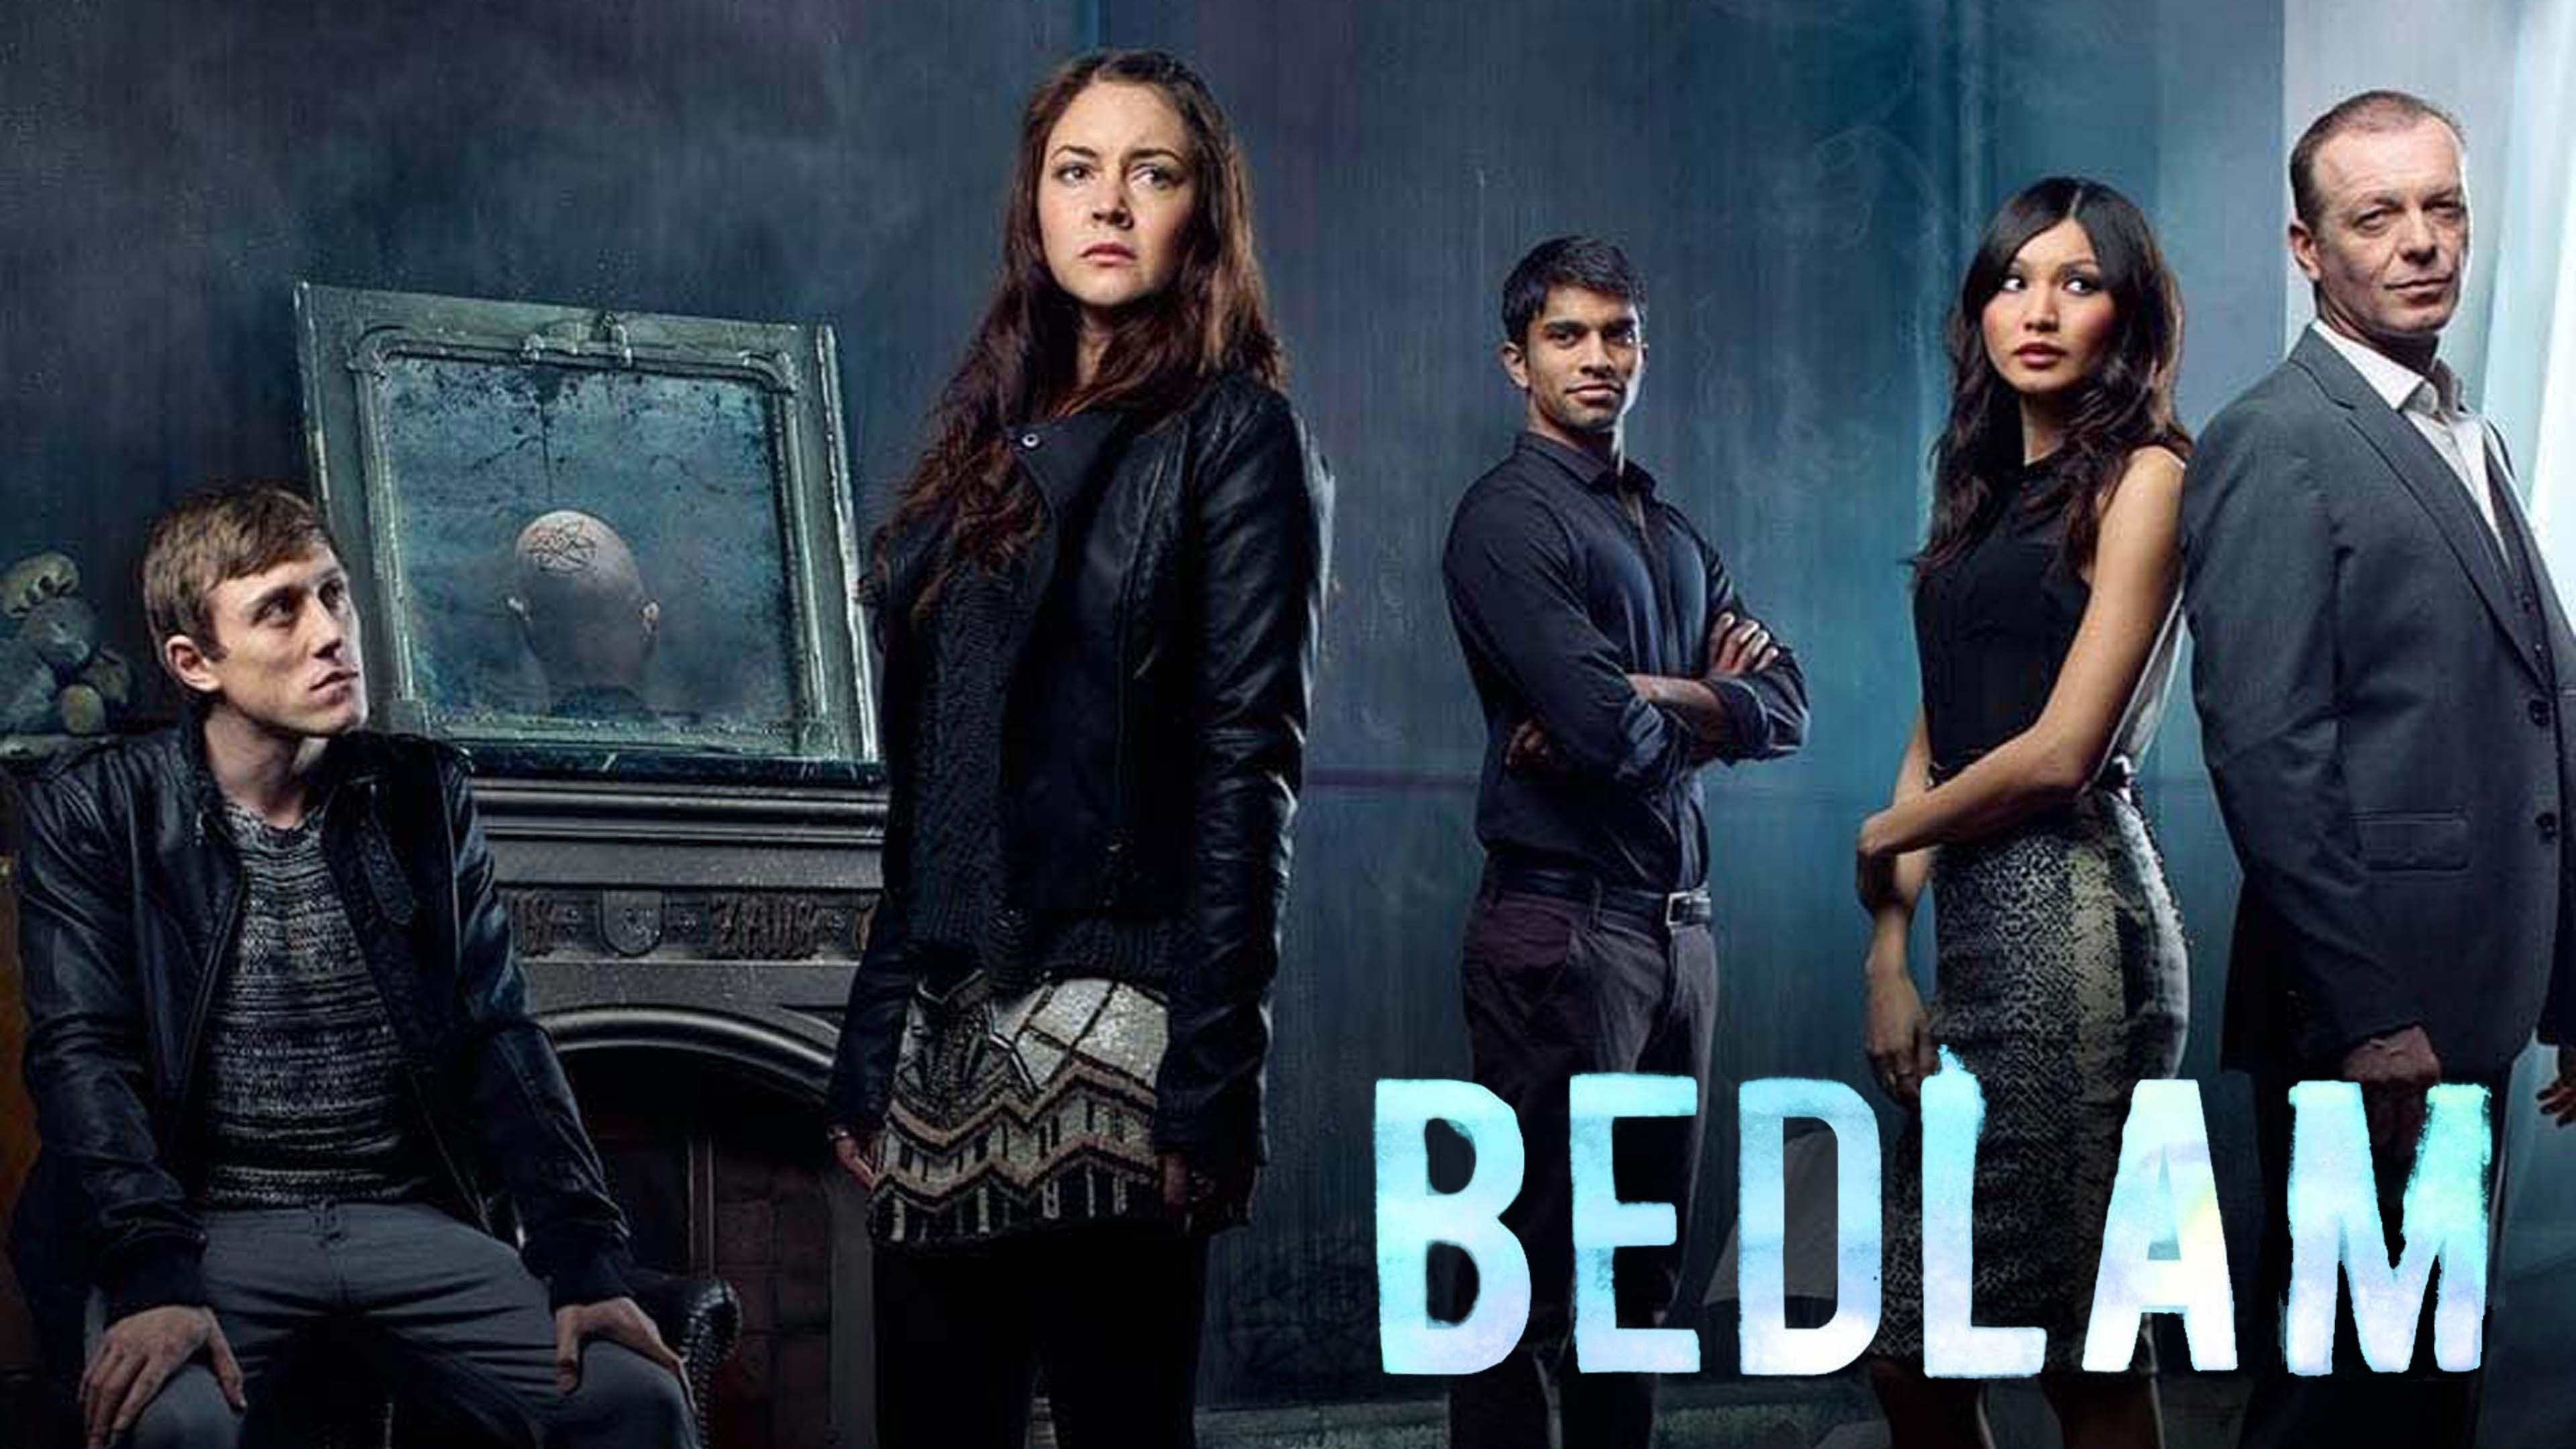 Watch Bedlam Streaming Online on Philo (Free Trial)